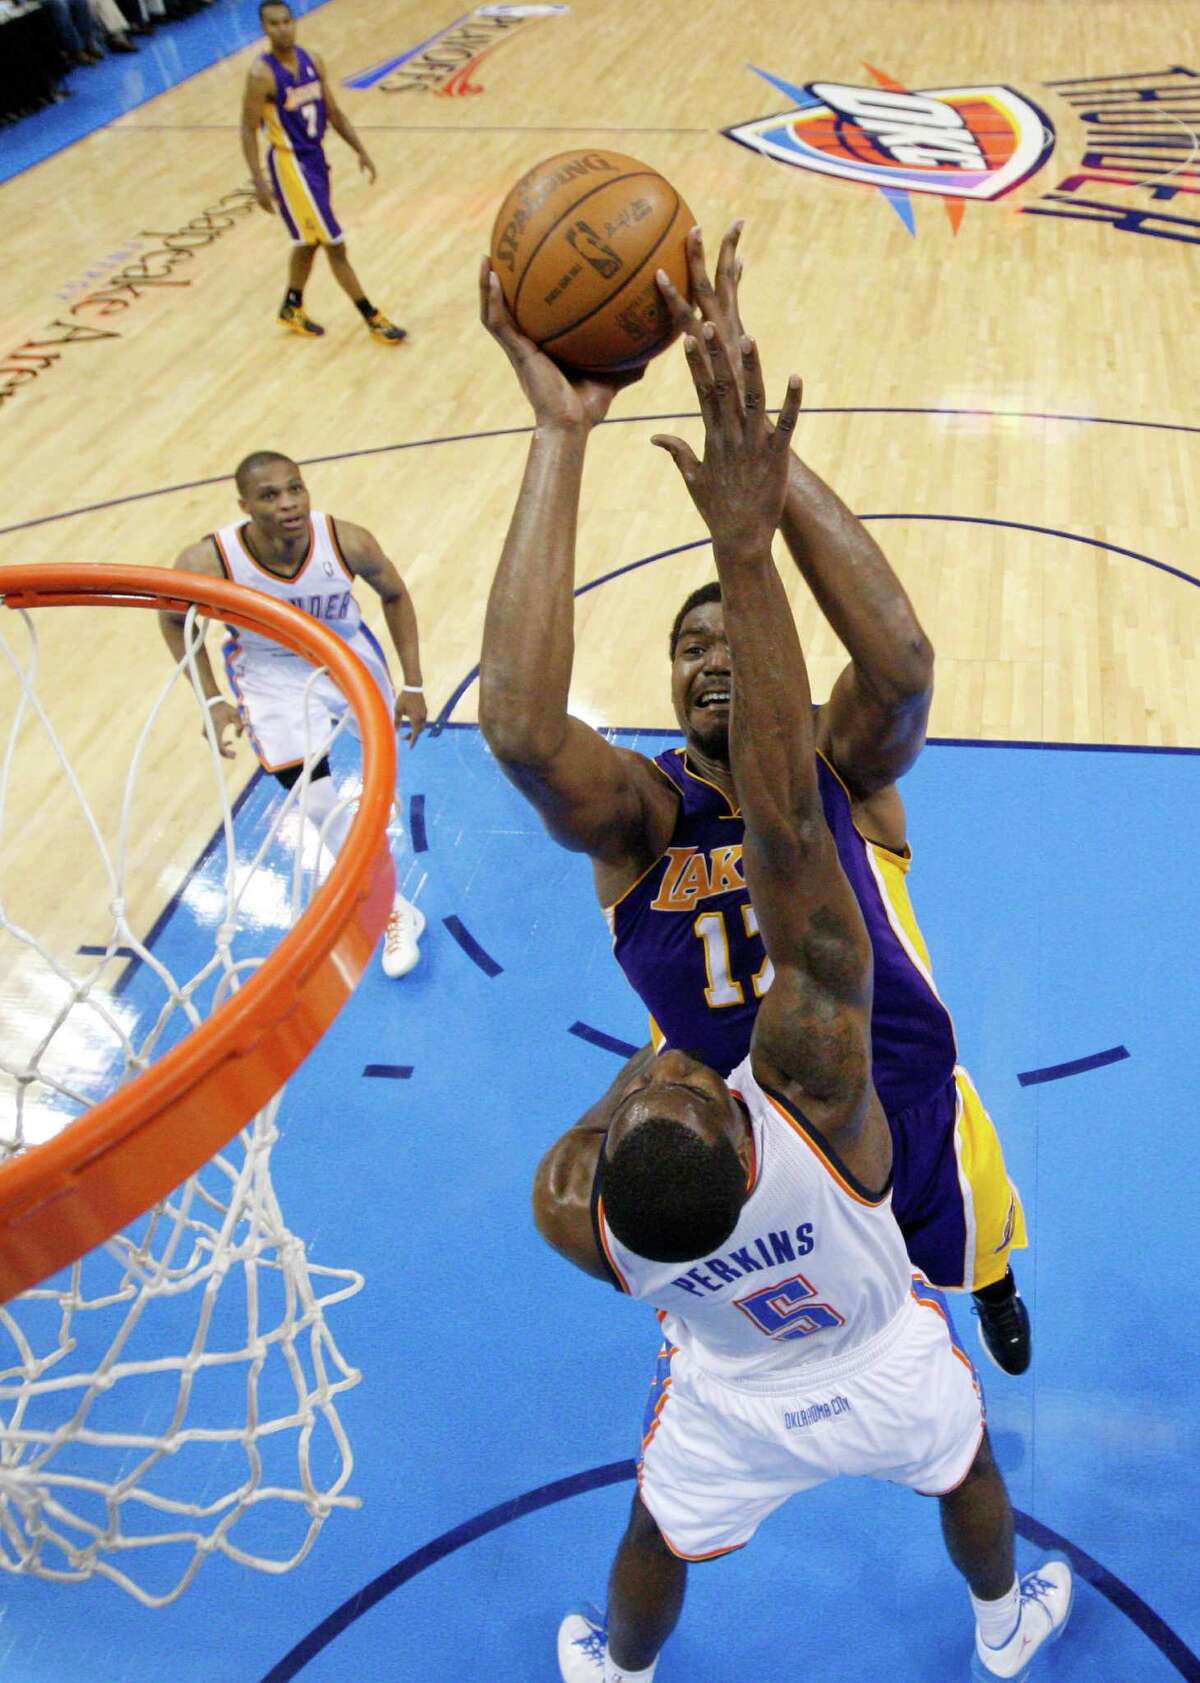 Los Angeles Lakers center Andrew Bynum, center, shoots between Oklahoma City Thunder guard Russell Westbrook, left, and center Kendrick Perkins (5) in the third quarter in Game 2 of an NBA basketball playoffs Western Conference semifinal, in Oklahoma City on Wednesday, May 16, 2012. Oklahoma City won 77-75. (AP Photo/Sue Ogrocki, Pool)